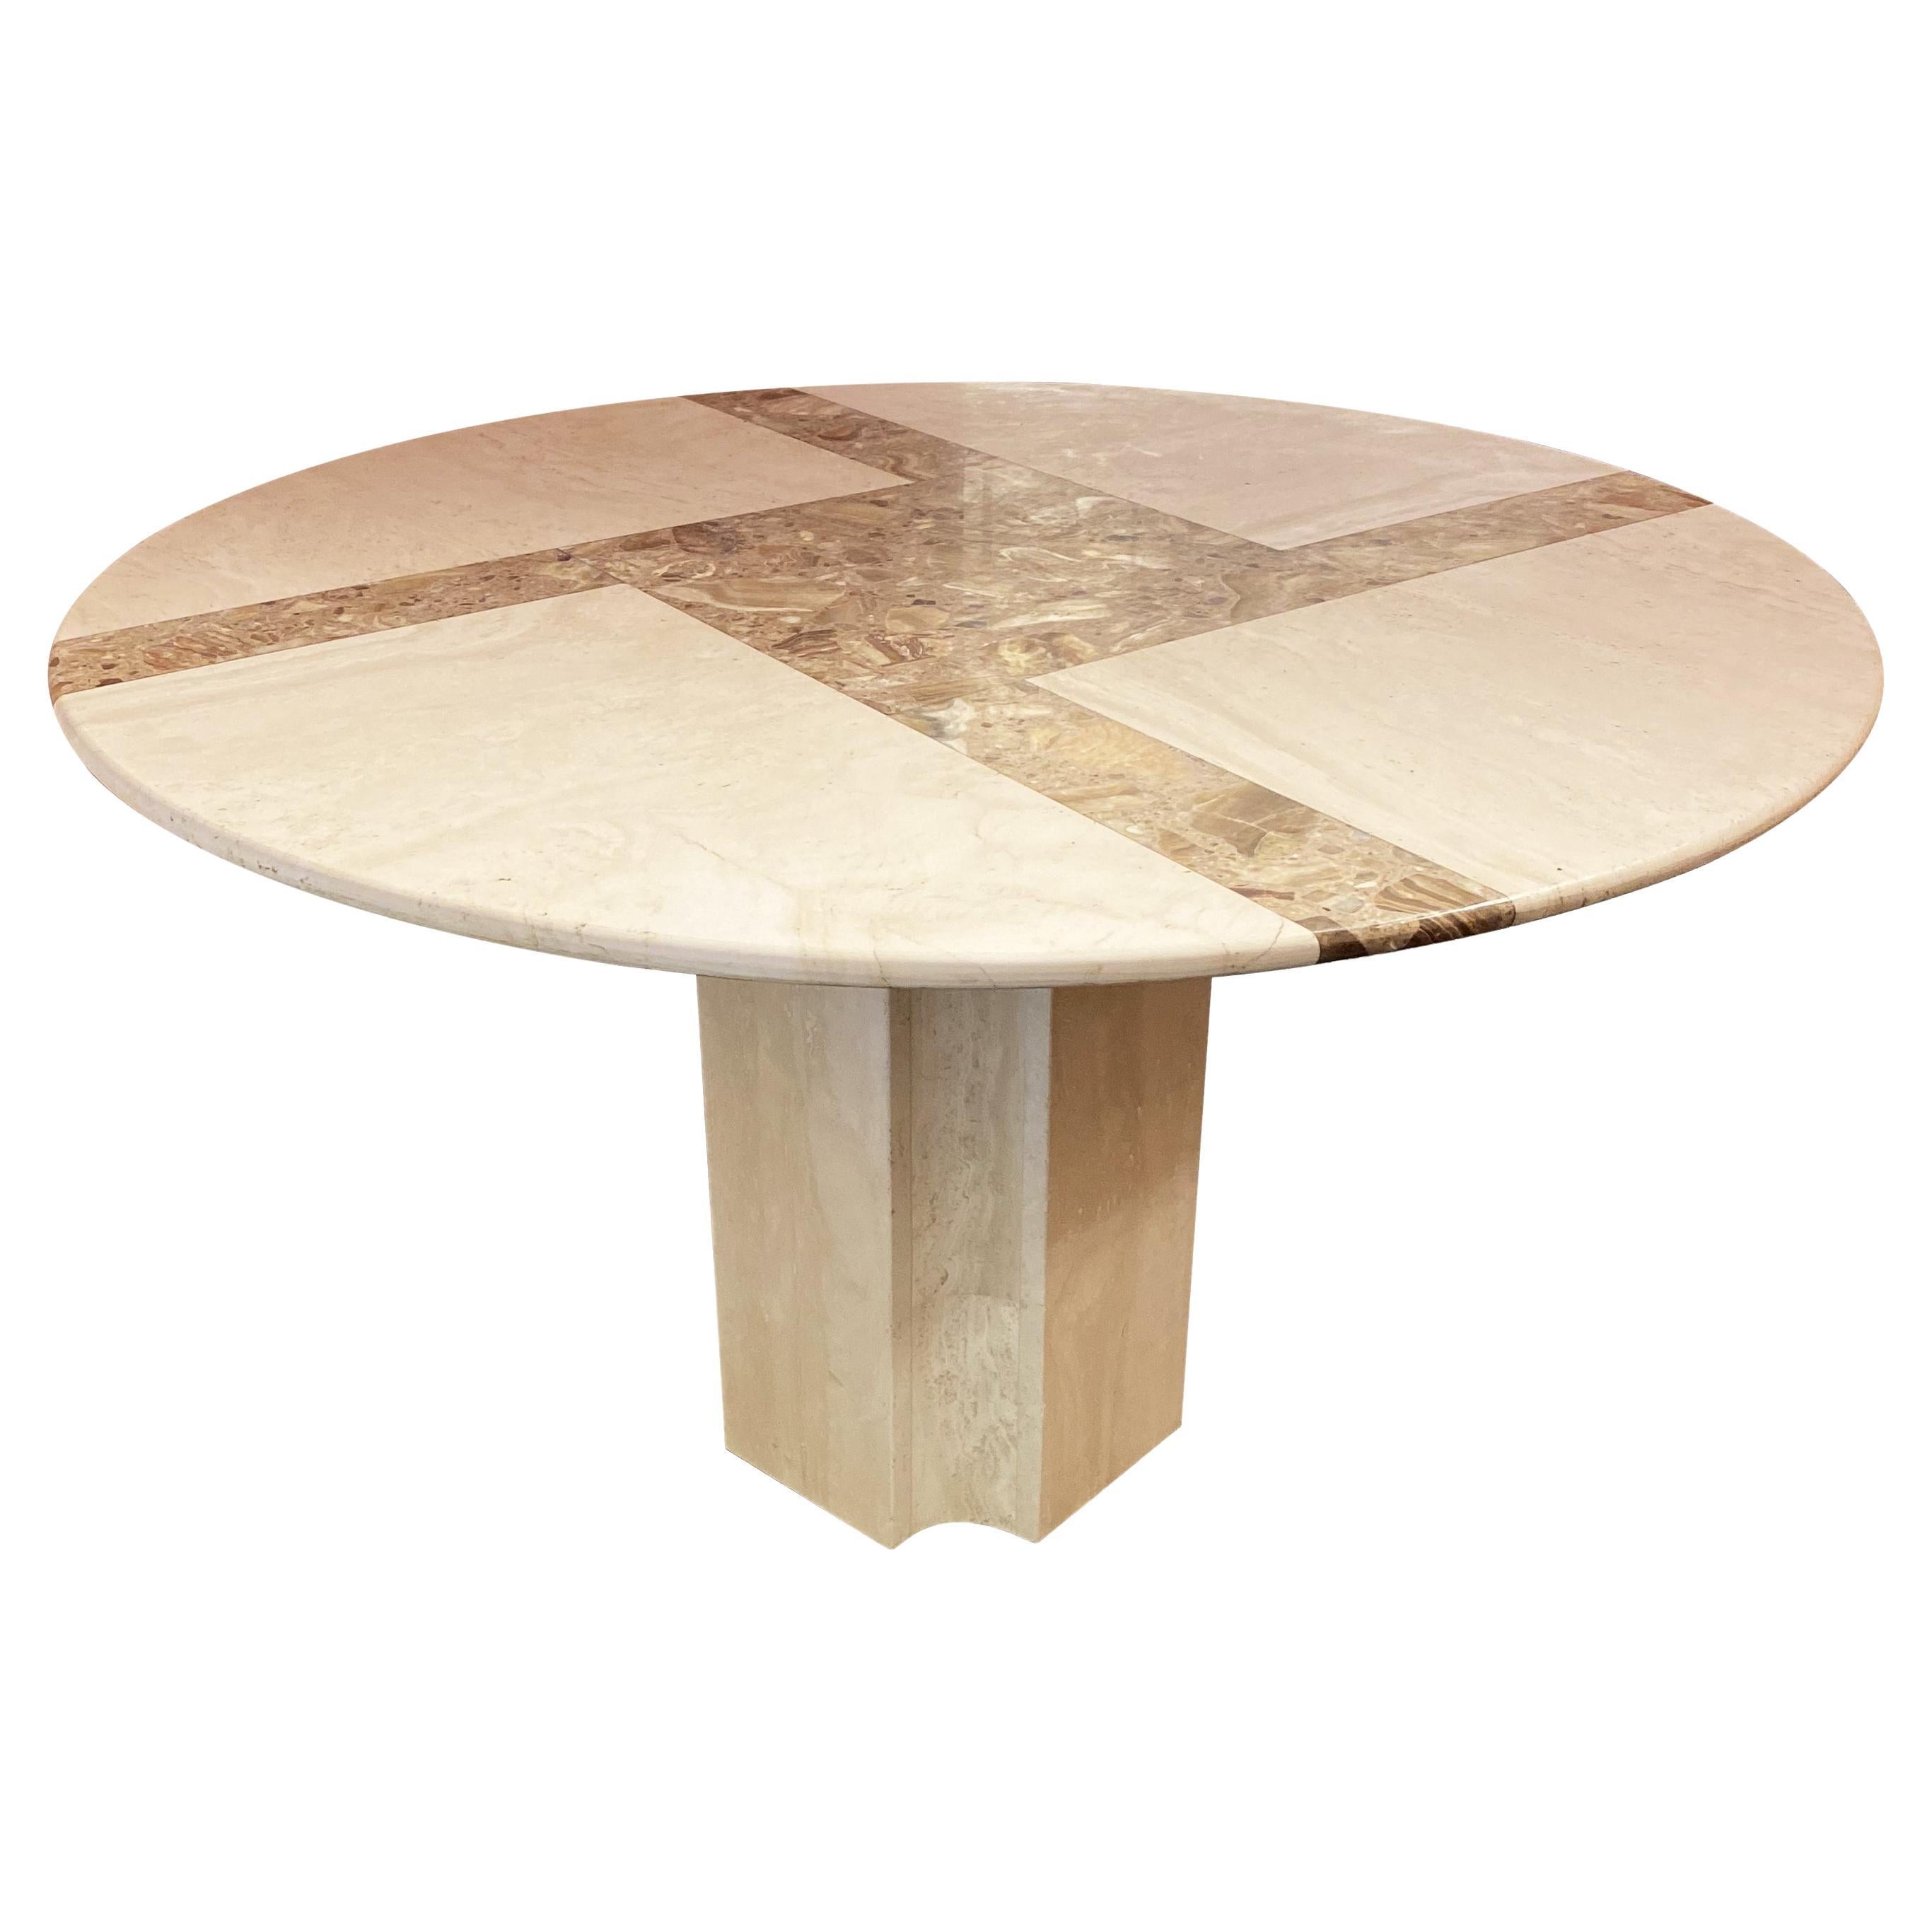 Round Table with Pedestal in Travertine and Onyx, Italy, Circa 1970